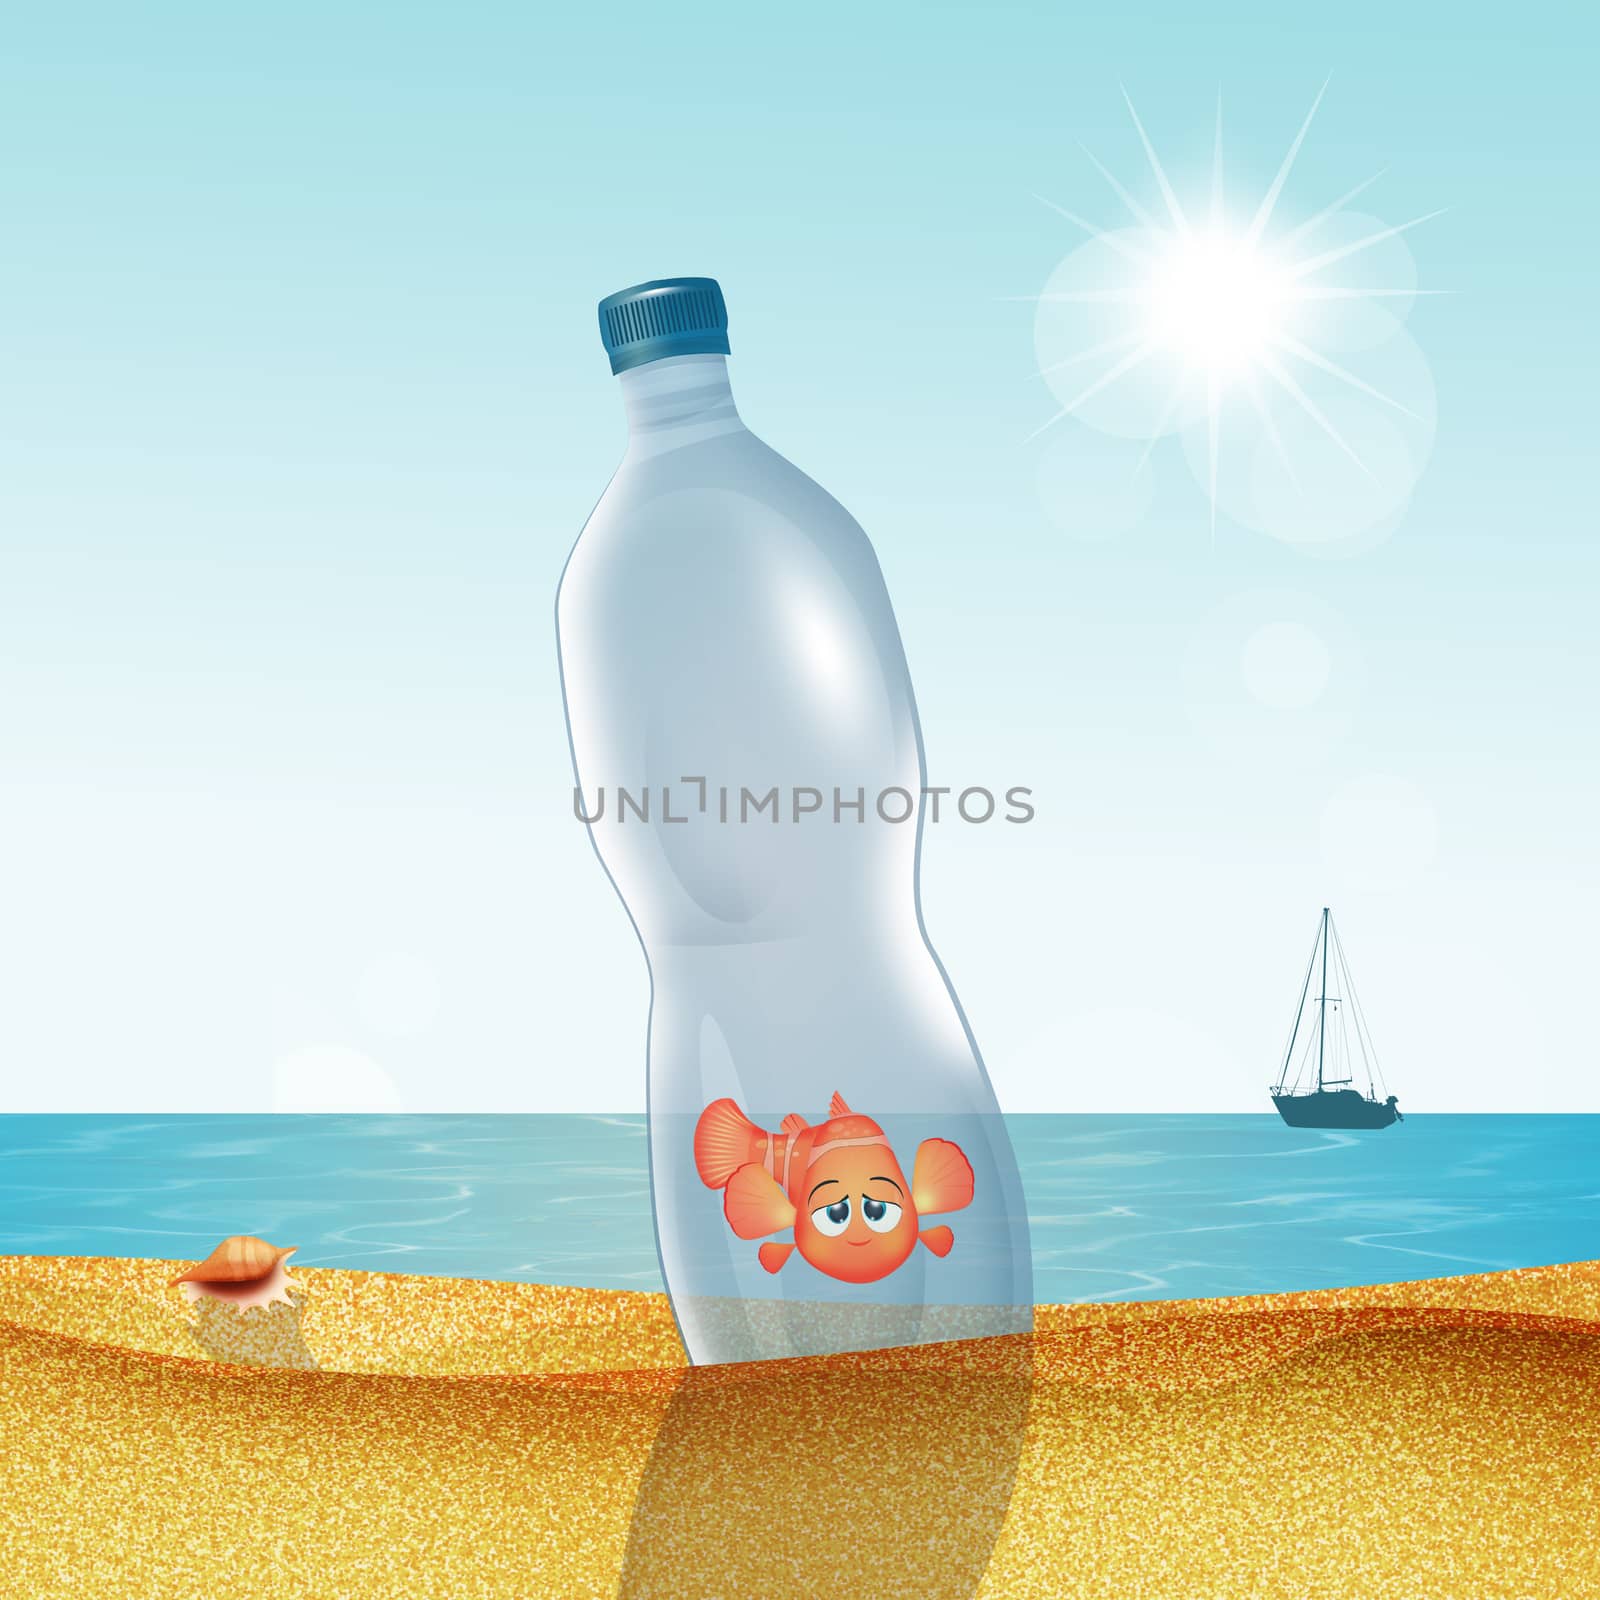 plastic bottles pollute the seas by adrenalina